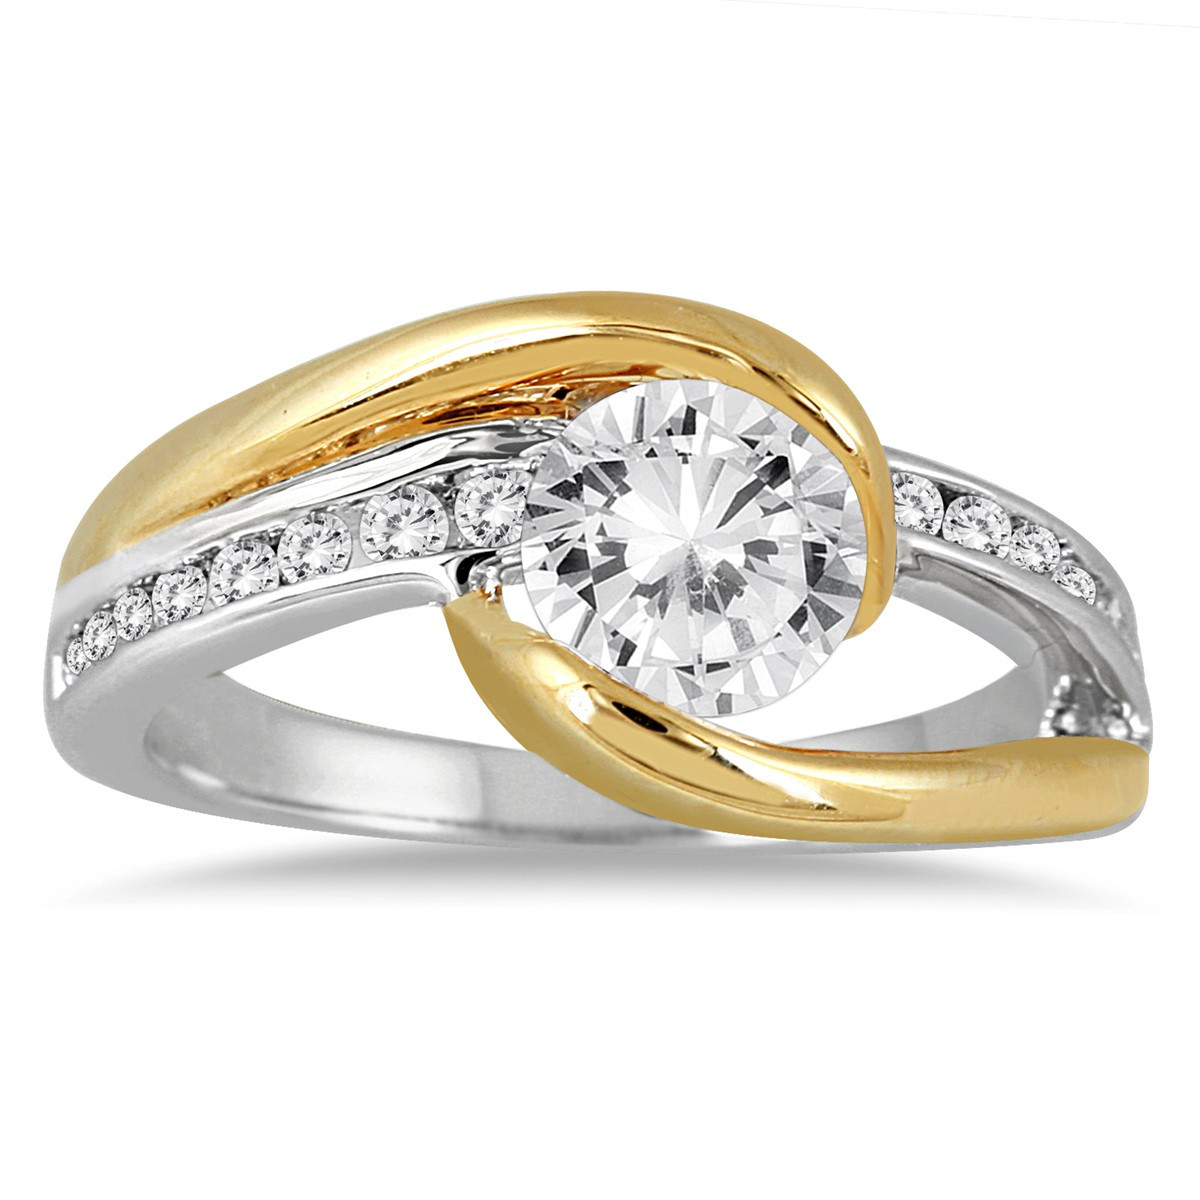 Two Tone Wedding Rings
 1 1 5 Carat Diamond Engagement Ring in Two Tone 14K Gold